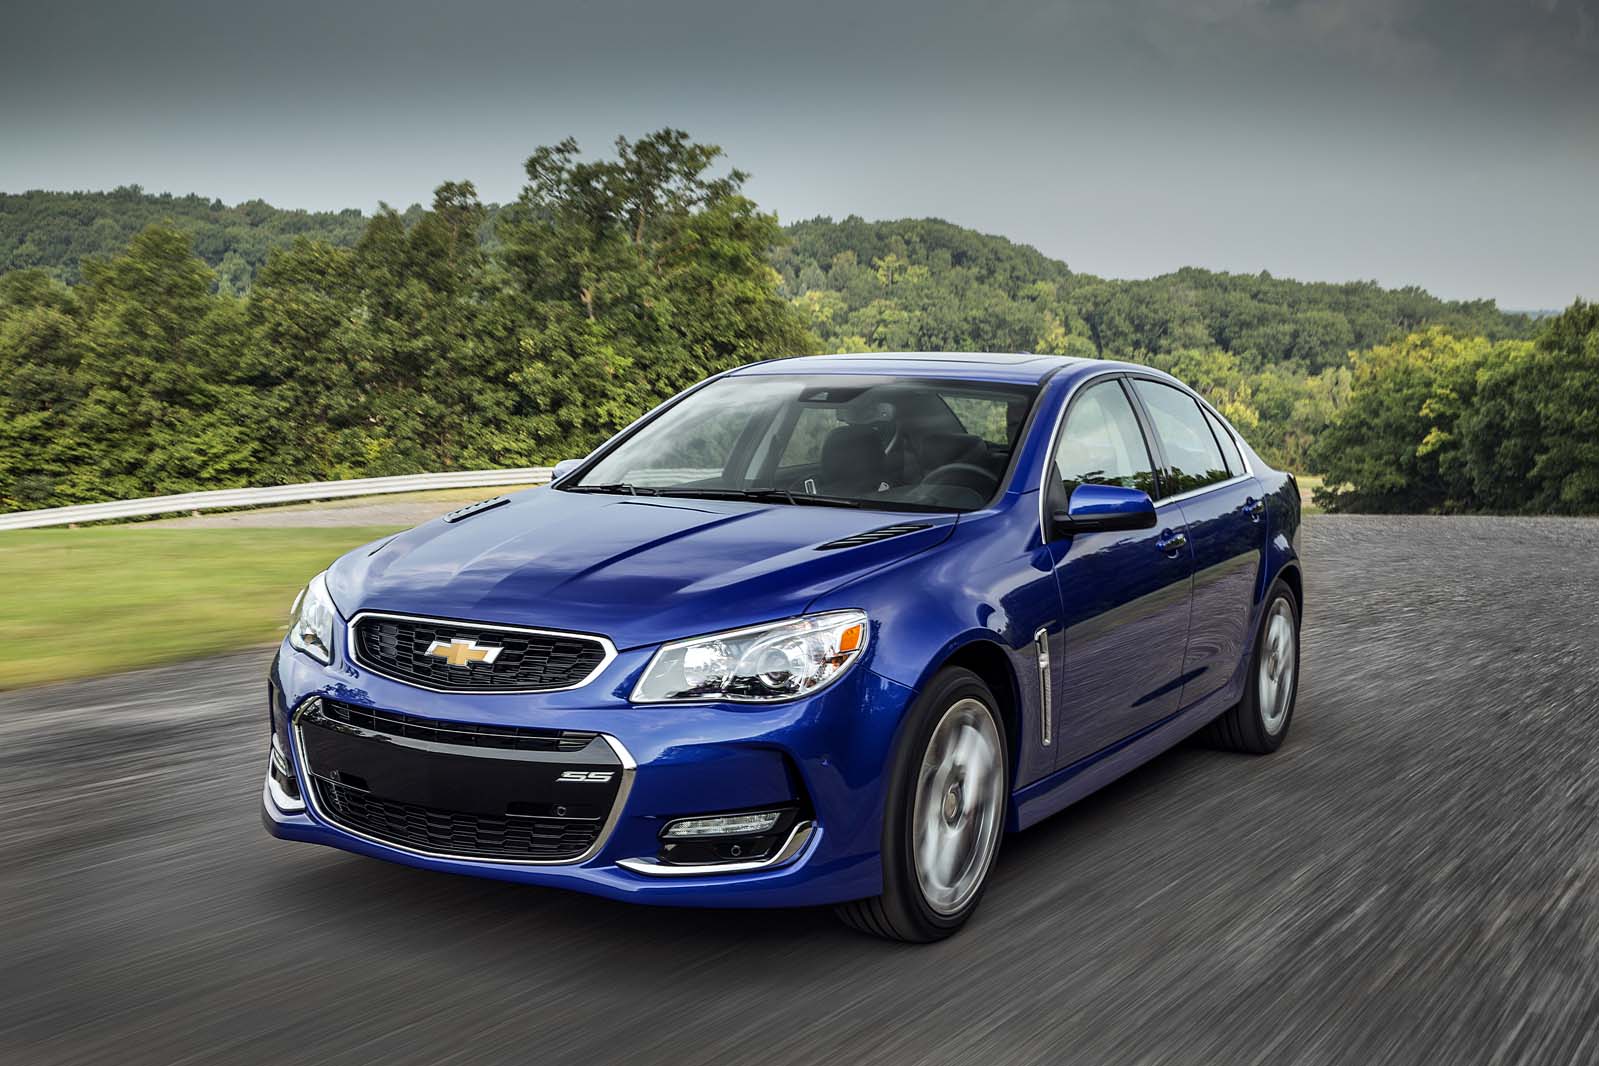 The 2016 Chevrolet SS sedan features several exterior enhancements that reinforce its commanding presence on the road. A revised front fascia features new, vertical ducts at the outer edges to direct airflow over the front wheel openings to improve aerodynamic efficiency. The fascia also incorporates new LED signature lighting, while new, functional hood vents and new-design 19-inch cast-aluminum wheels contribute to a stronger appearance for the rear-drive sports sedan.